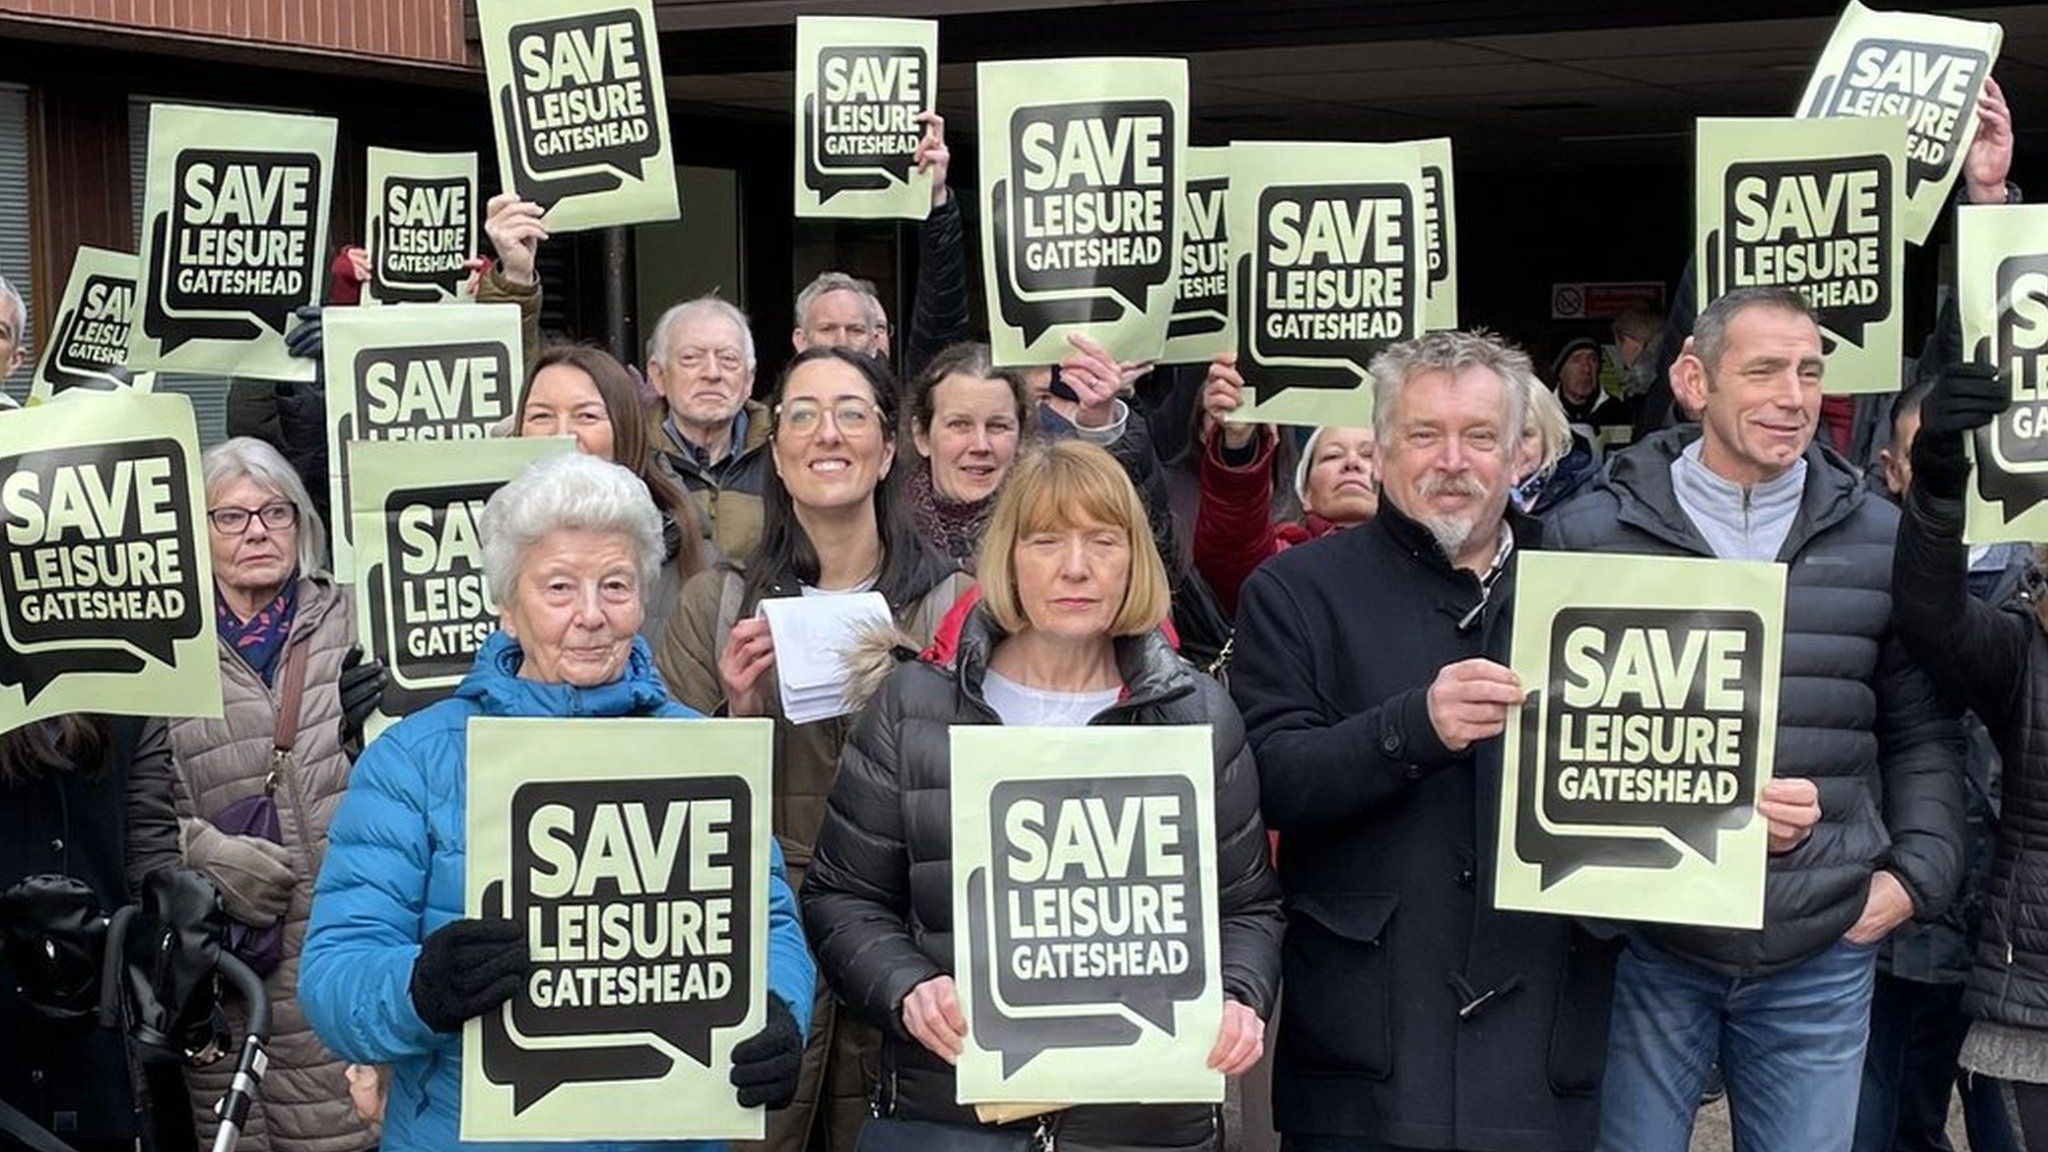 Protestors holding Save Leisure Gateshead placards stand outside the offices of Gateshead Council.